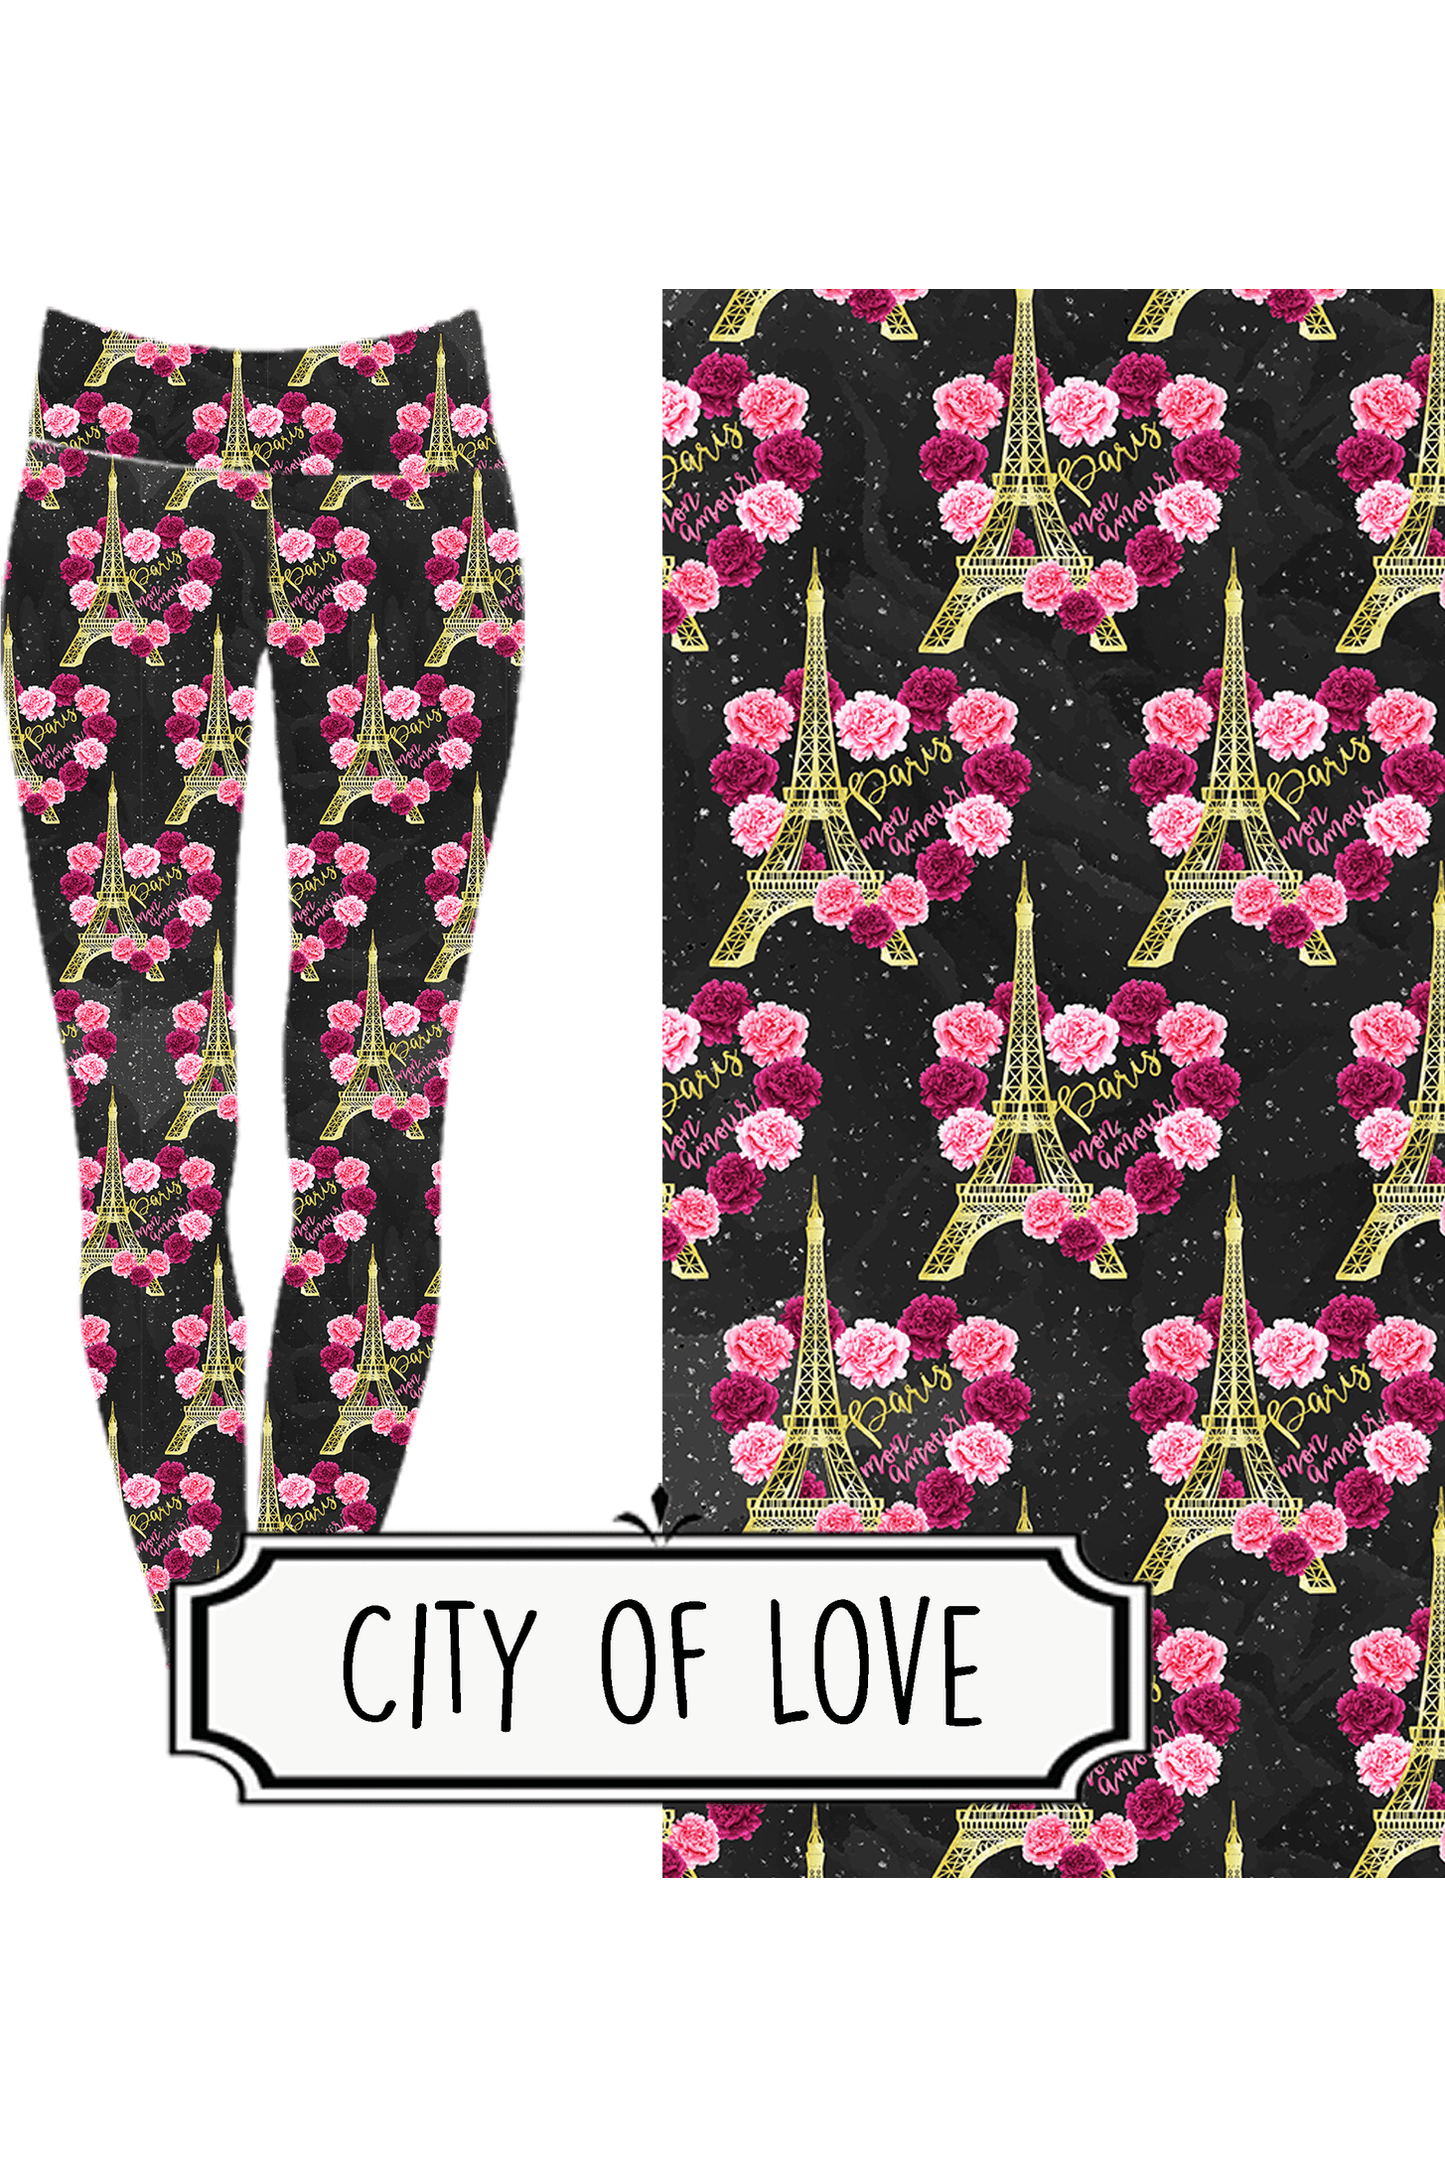 Yoga Style Leggings - City Of Love by Eleven & Co.